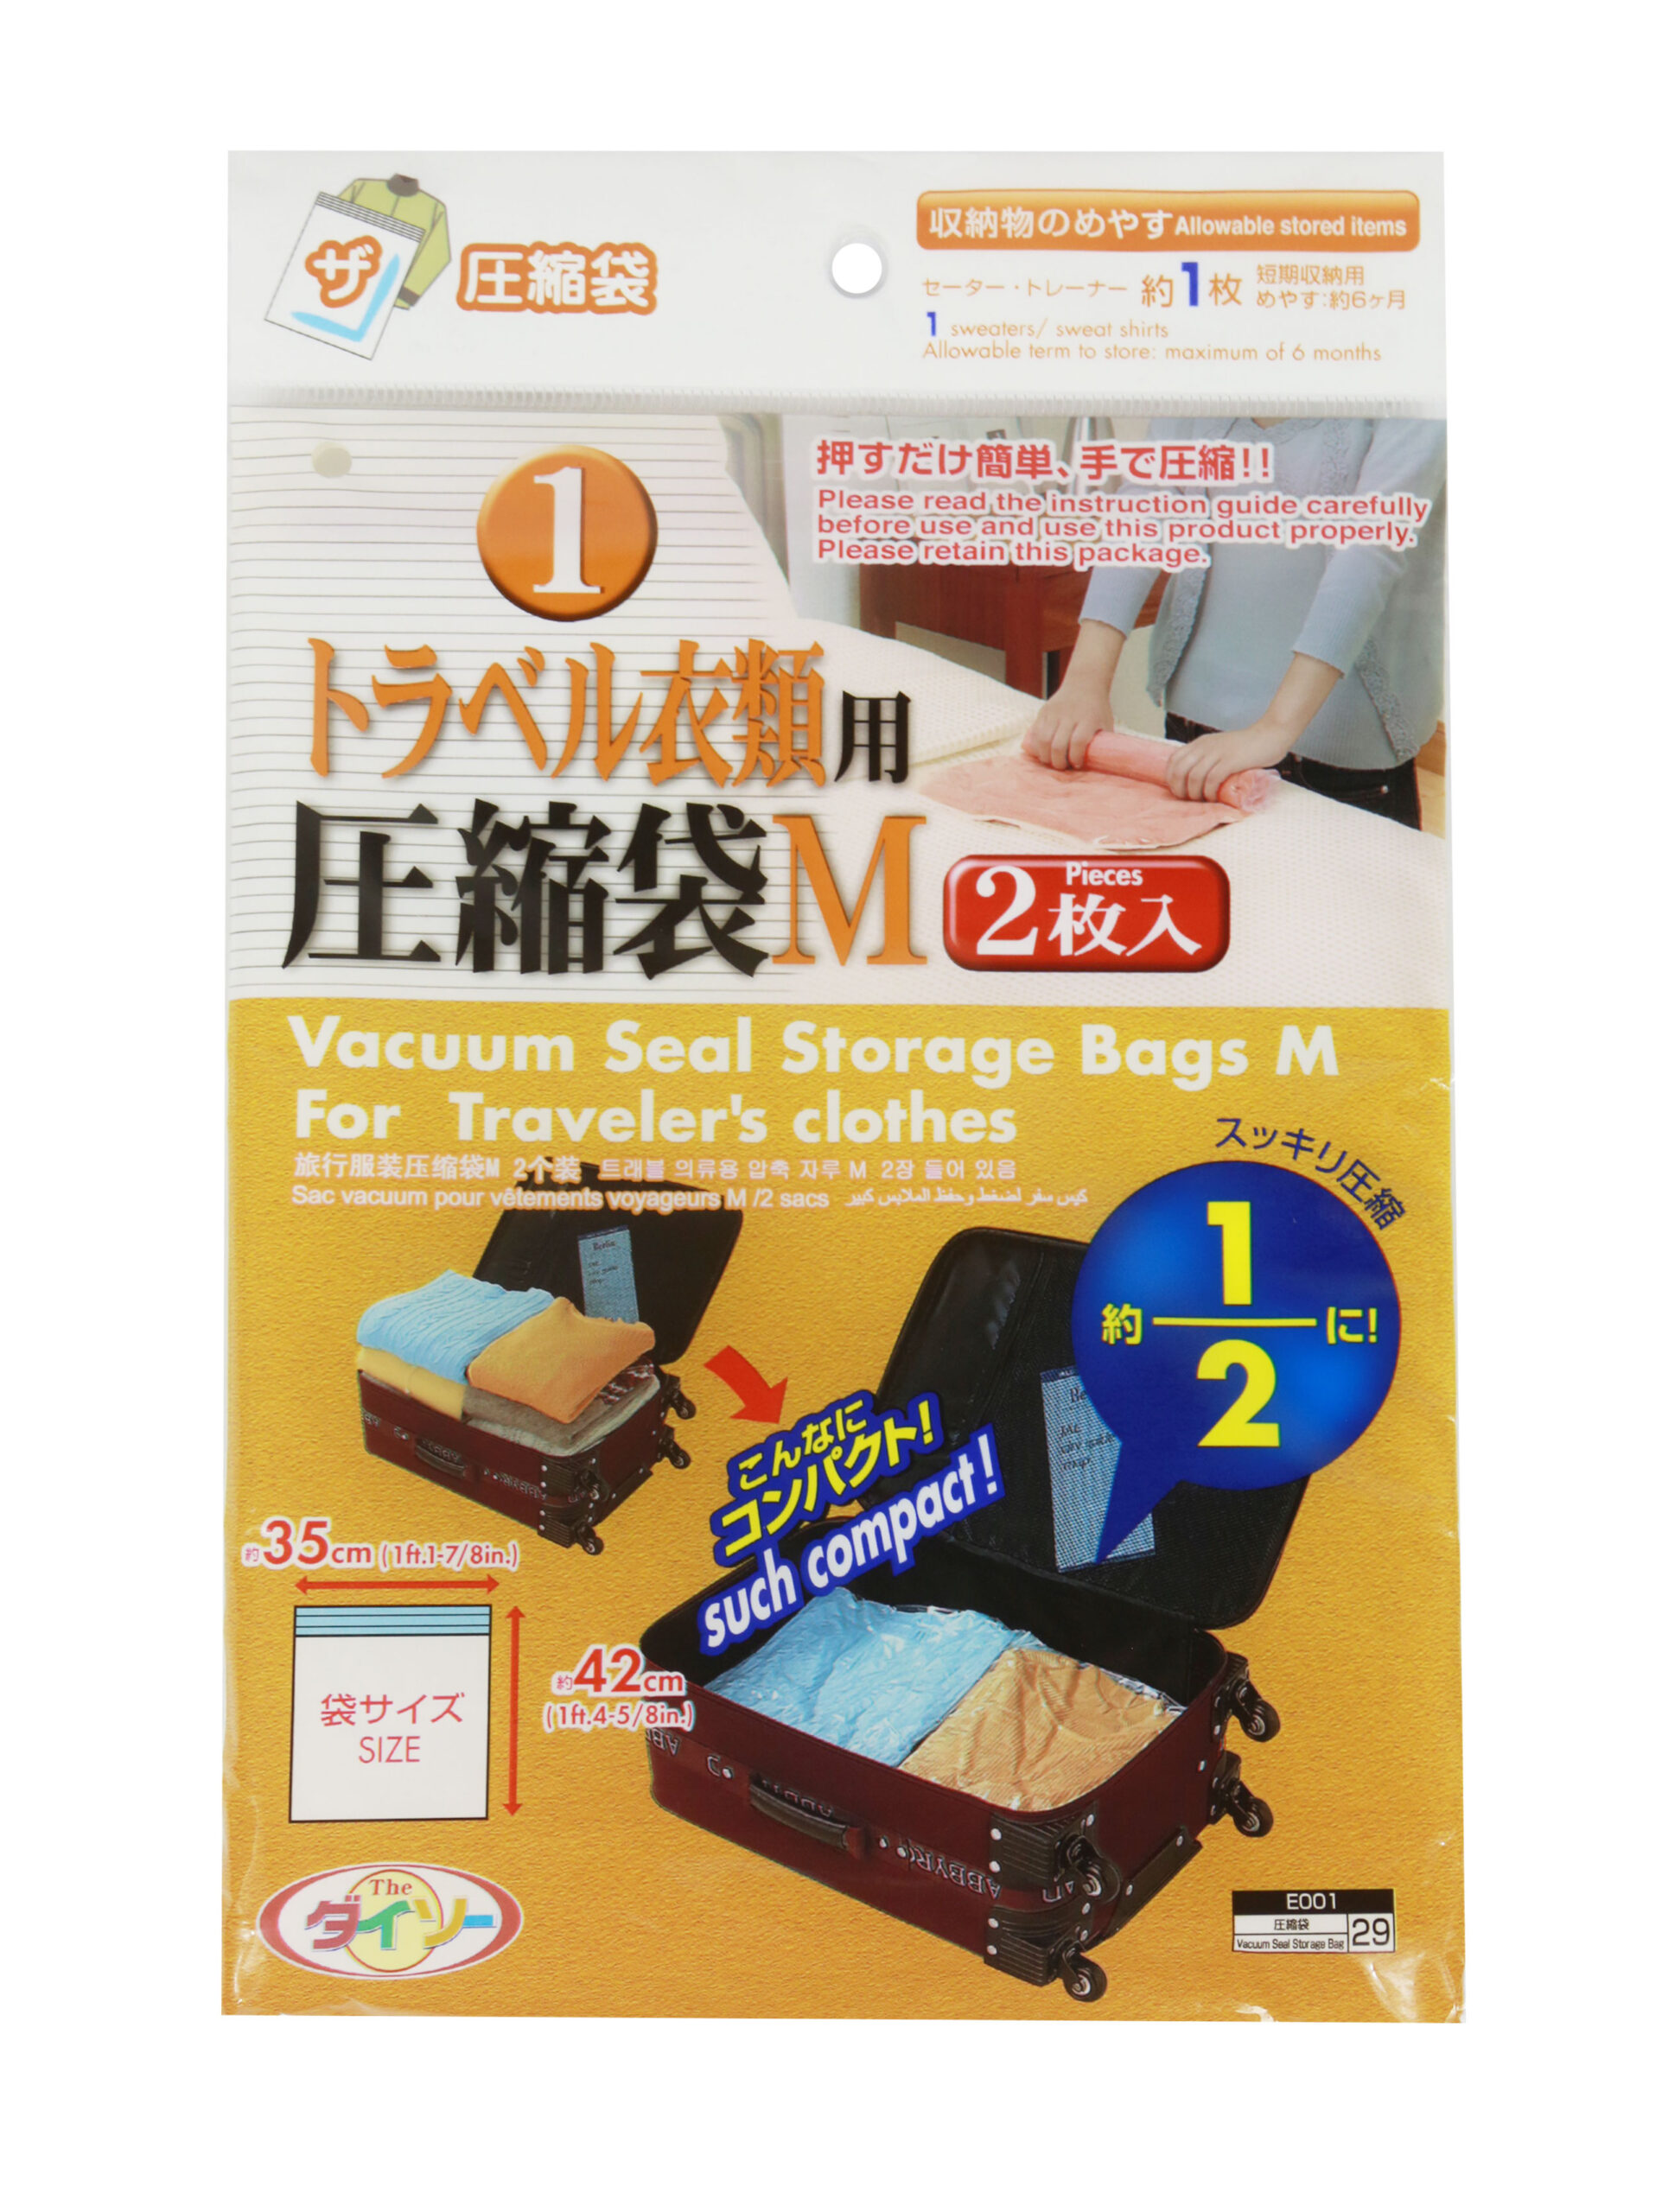 https://daisome.com/wp-content/uploads/2021/08/Travel_Vacuum-Seal-Storage-Bags-M-scaled.jpg